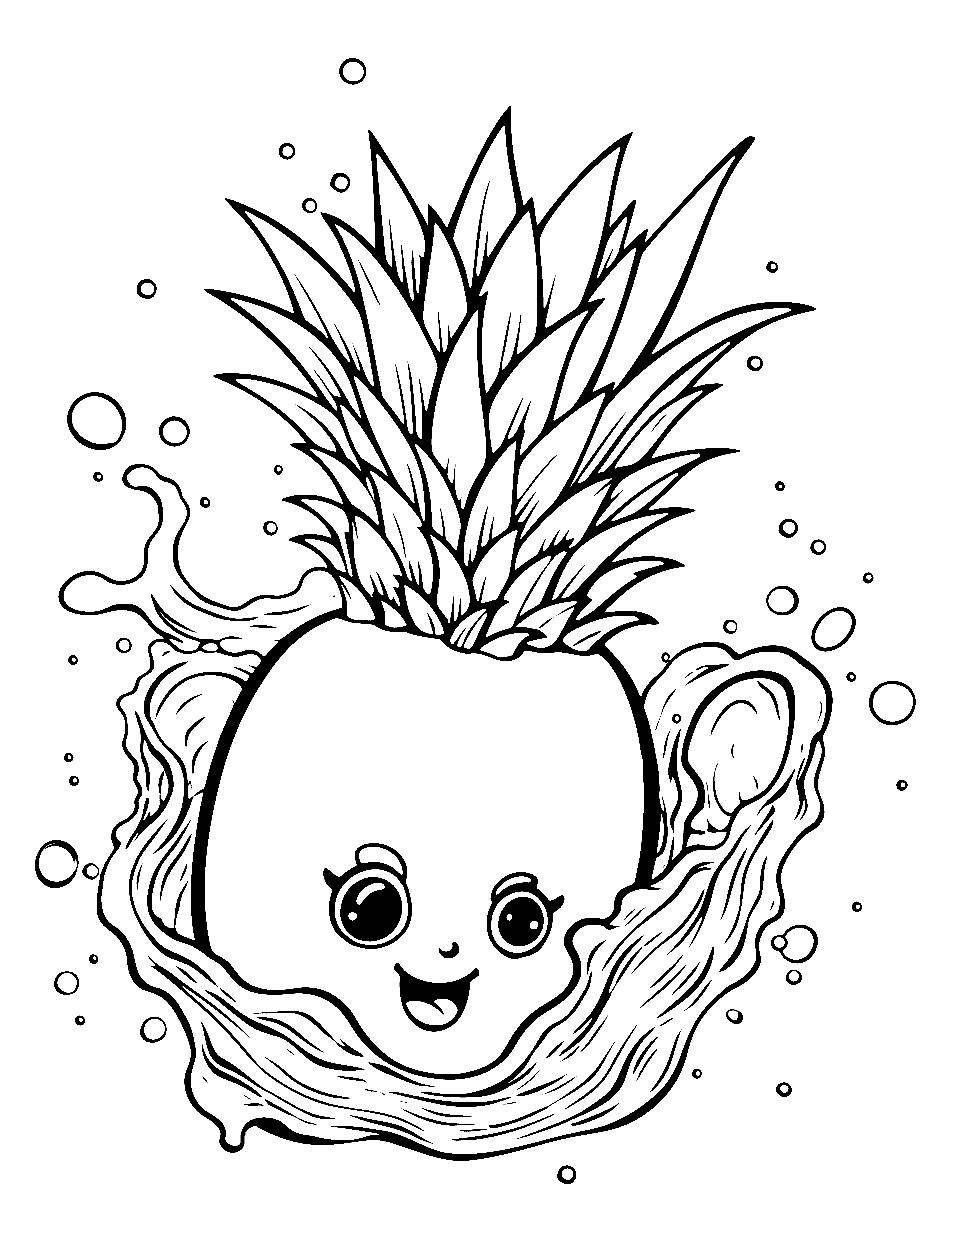 Tropical Fruit Splash Coloring Page - Tropical Shopkins like pineapple having a splash in the water.